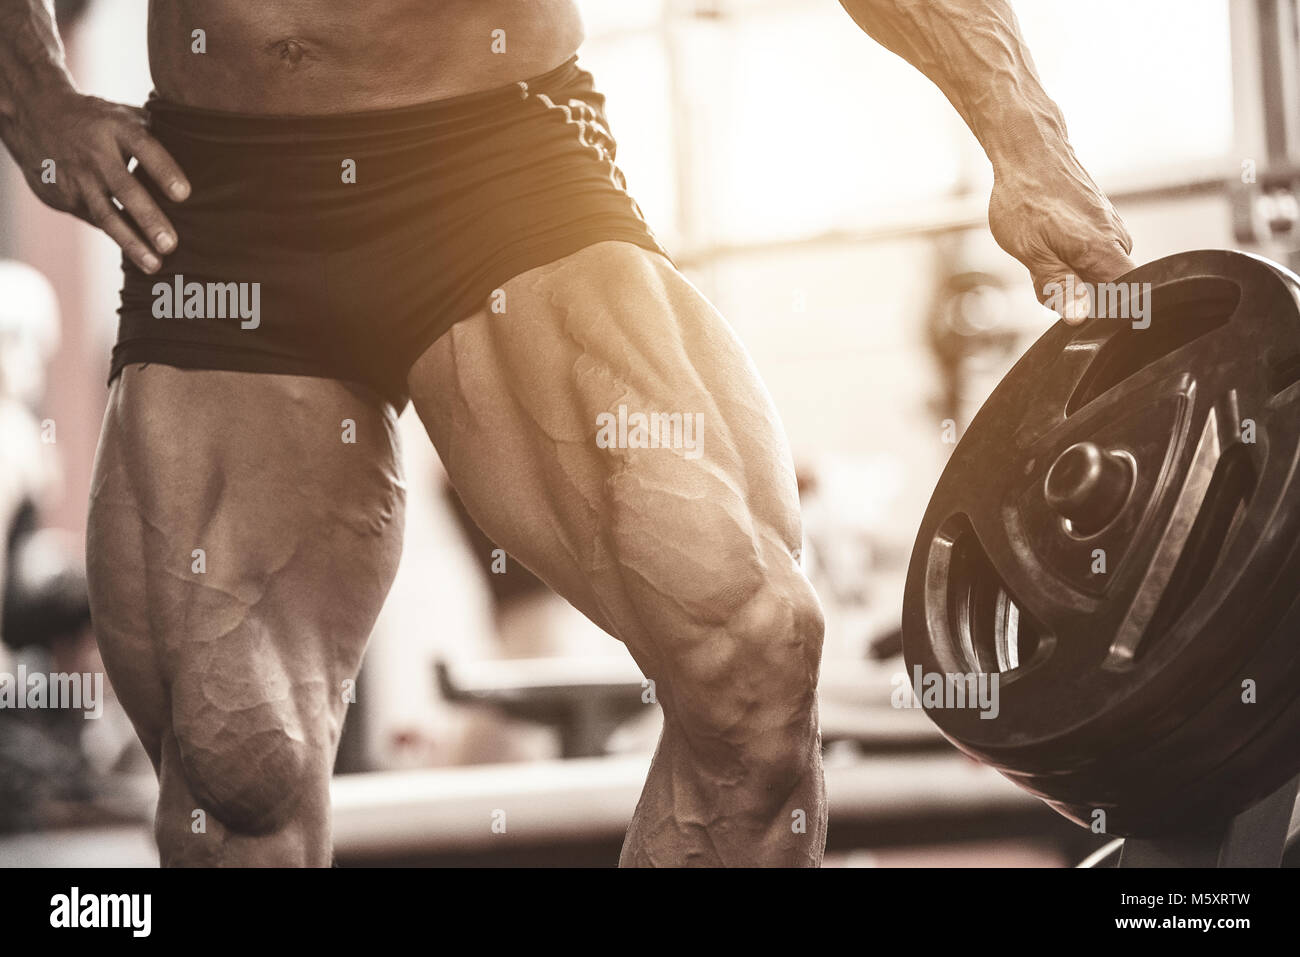 Close-up of bodybuilders muscular legs. Athlete man doing workout exercise in gym Stock Photo